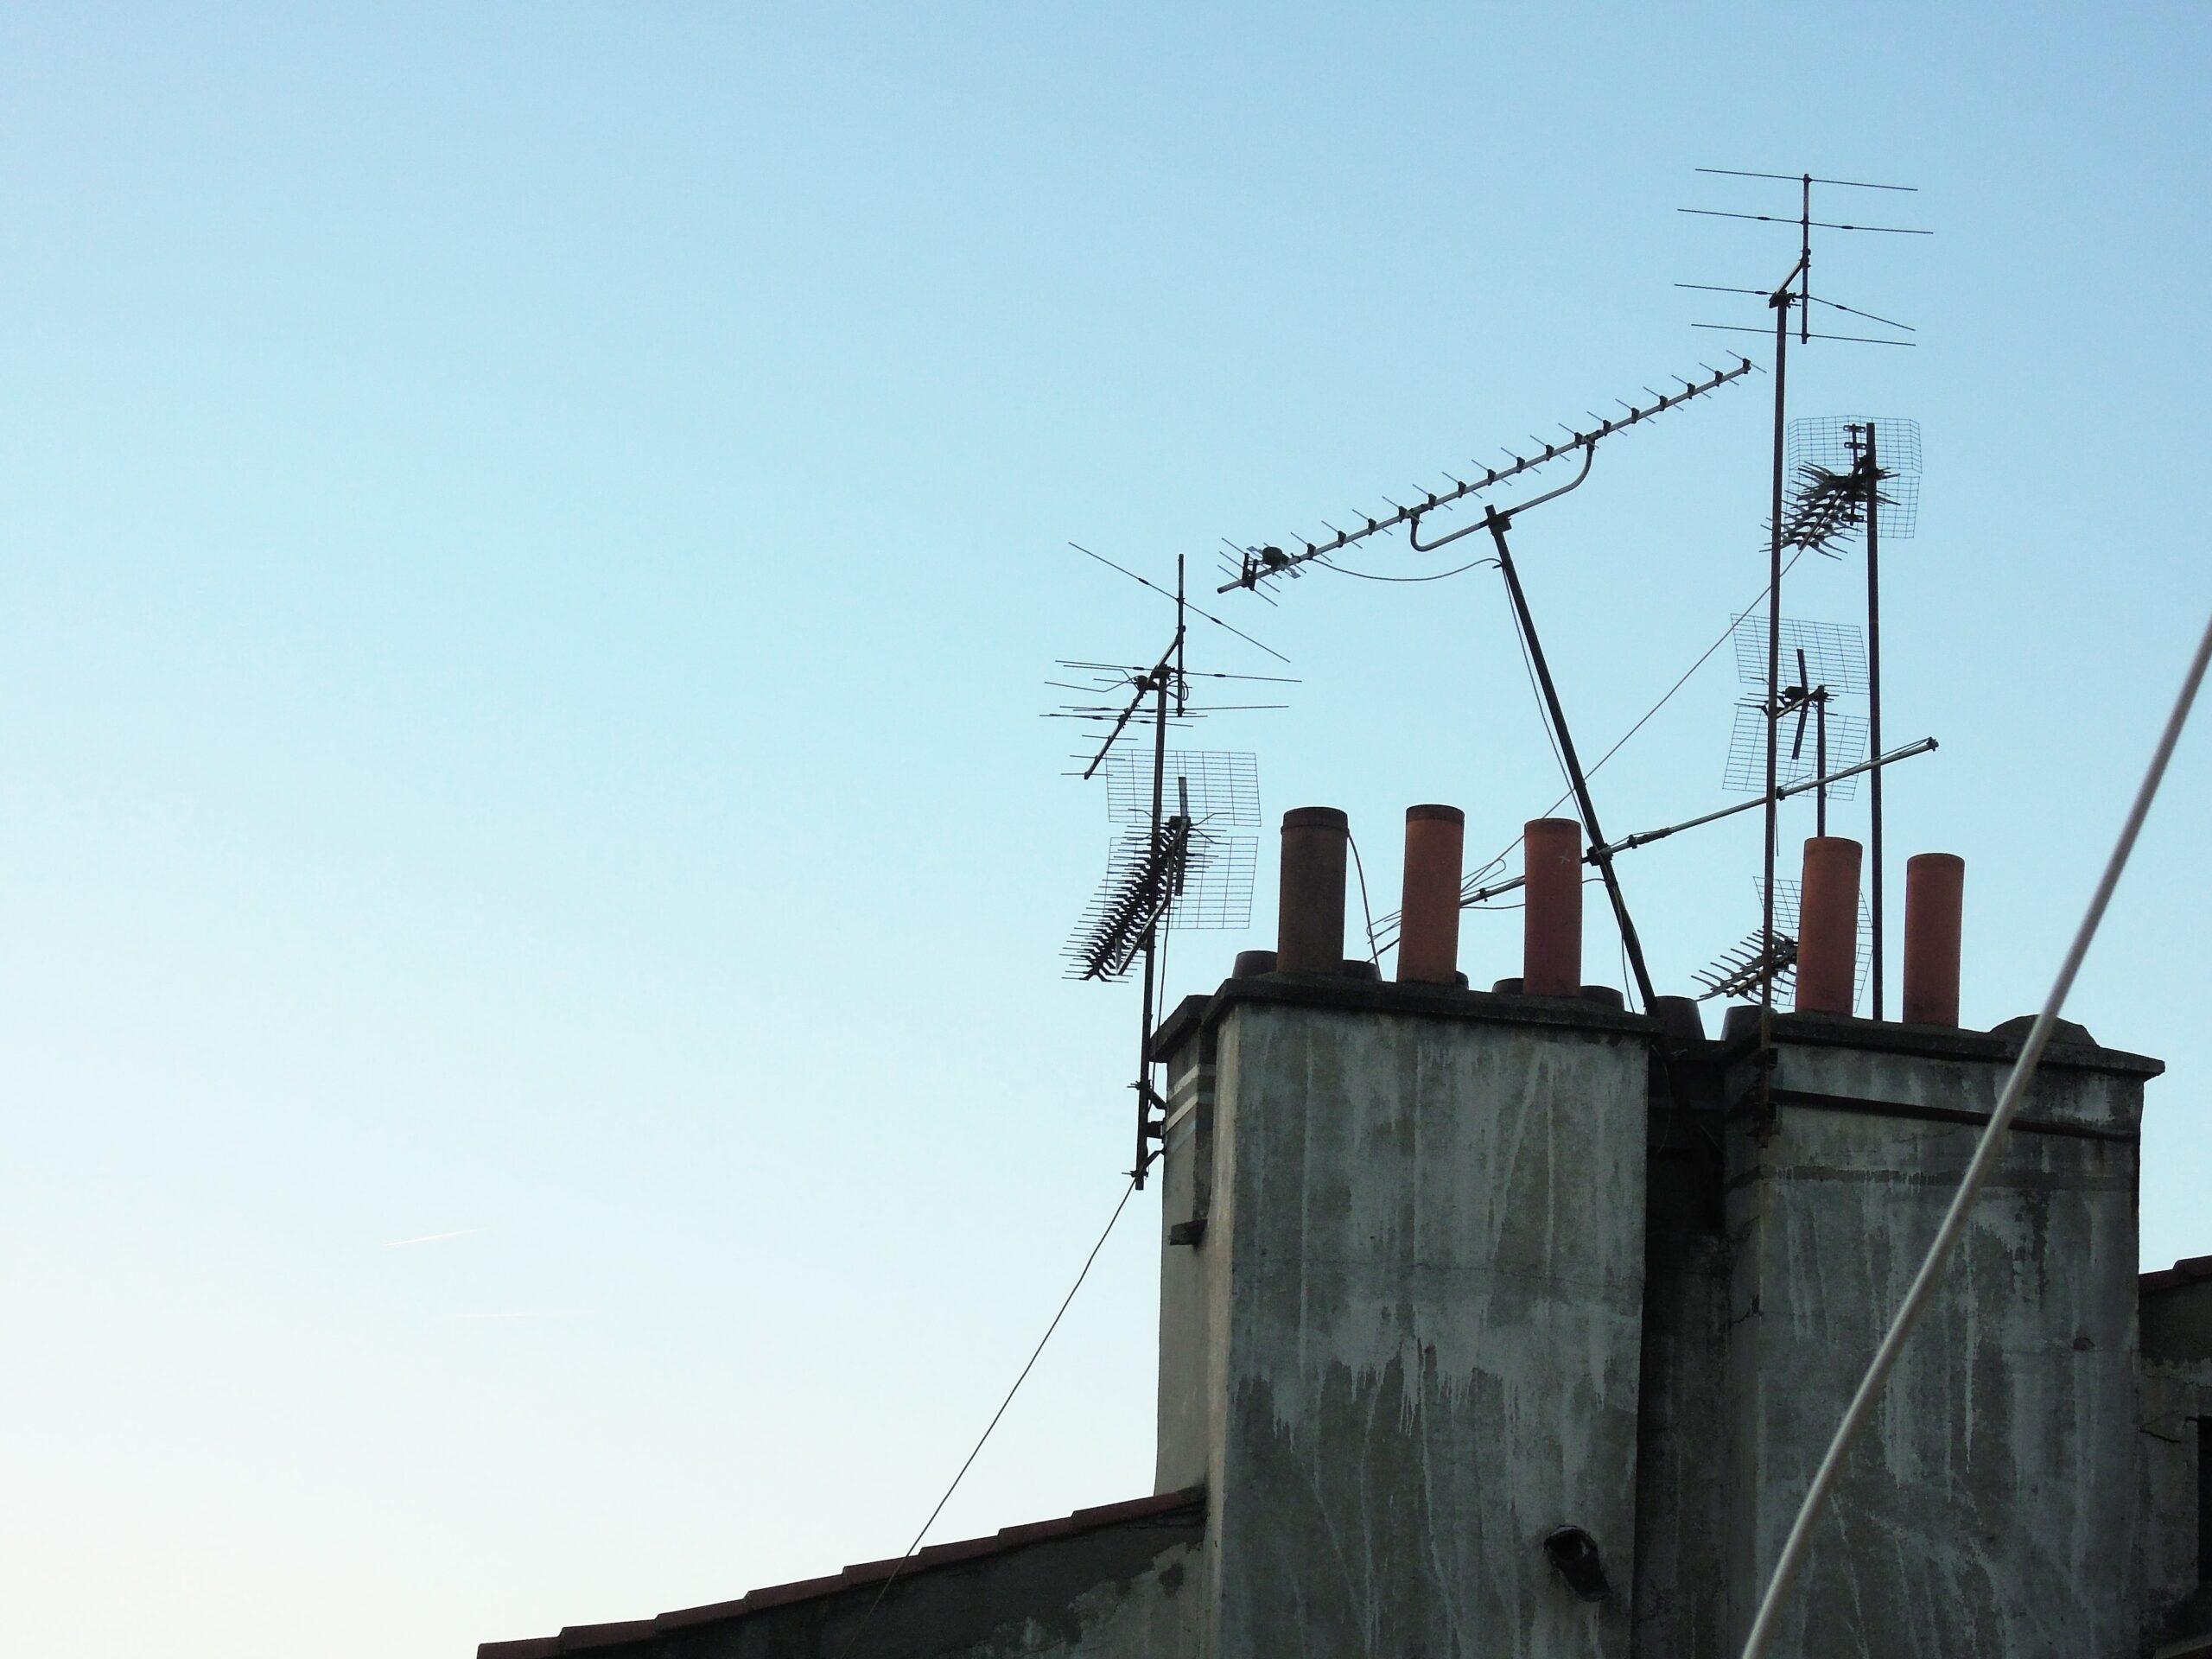 How High Should A TV Antenna Be Mounted?